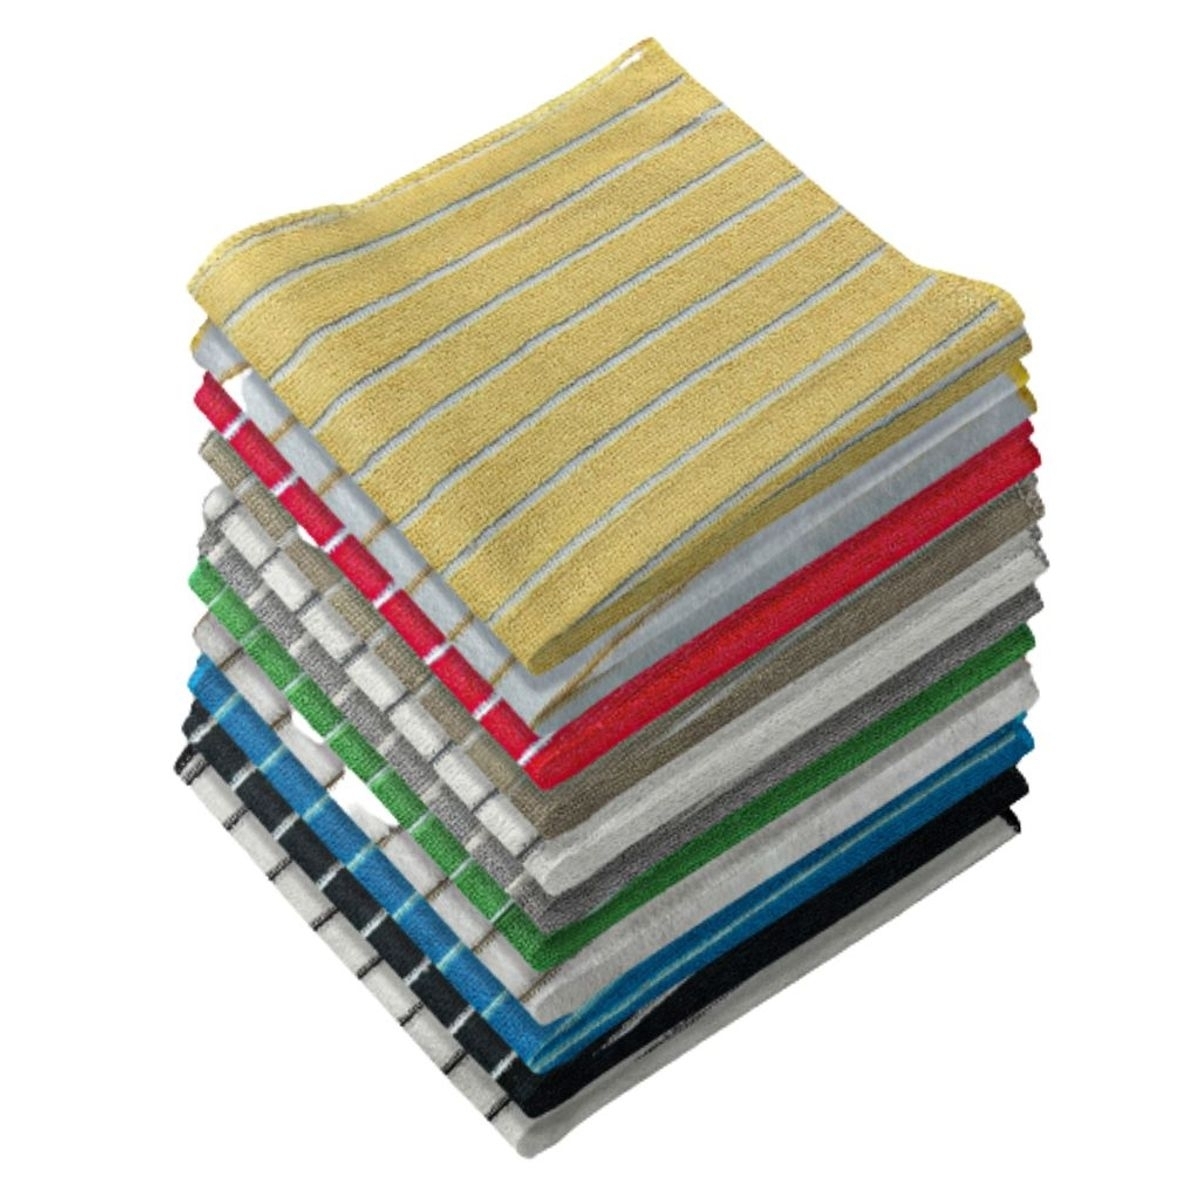 12-Pack: Ultra-Absorbent Multi Use Cleaning Super Soft Microfiber Dish Utility Rag Cloths - Waffle